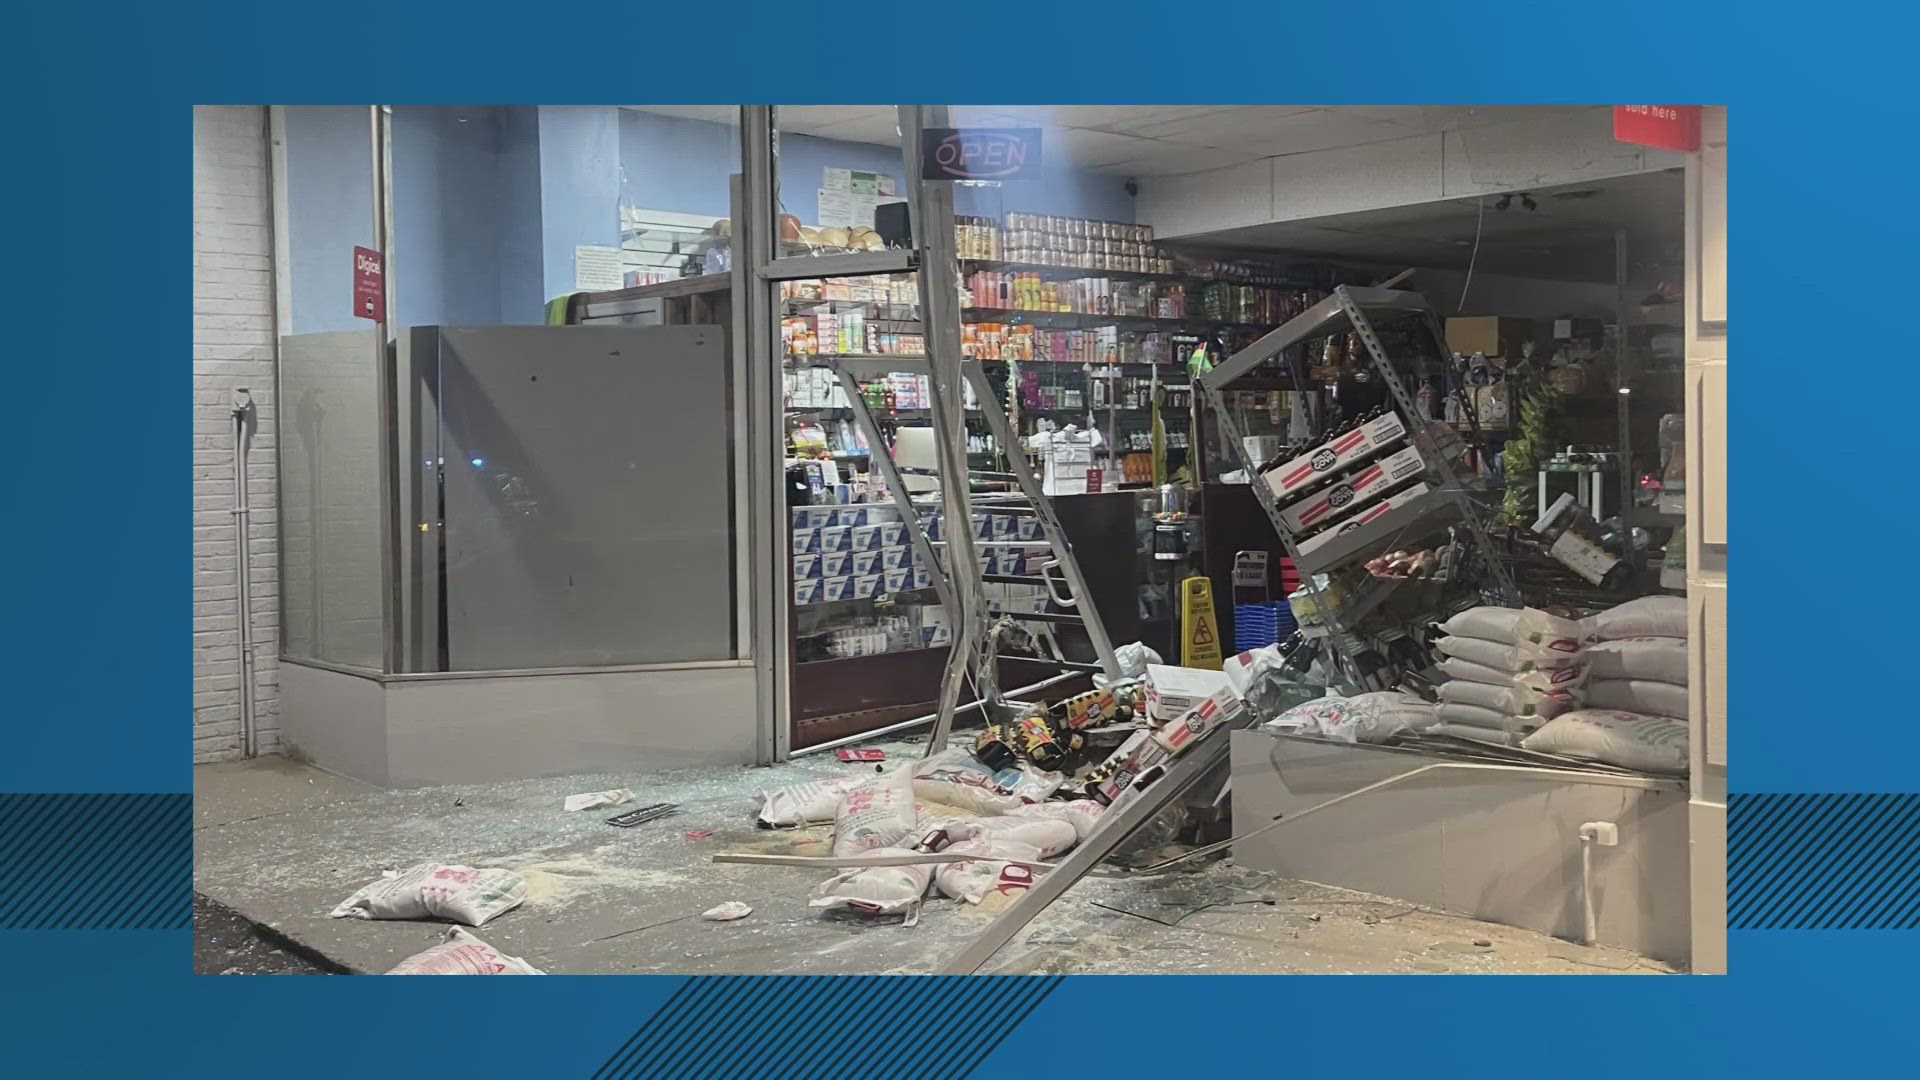 Montgomery County Police say overnight Thursday, suspects rammed a car through the front of Global International Grocery before stealing an ATM.